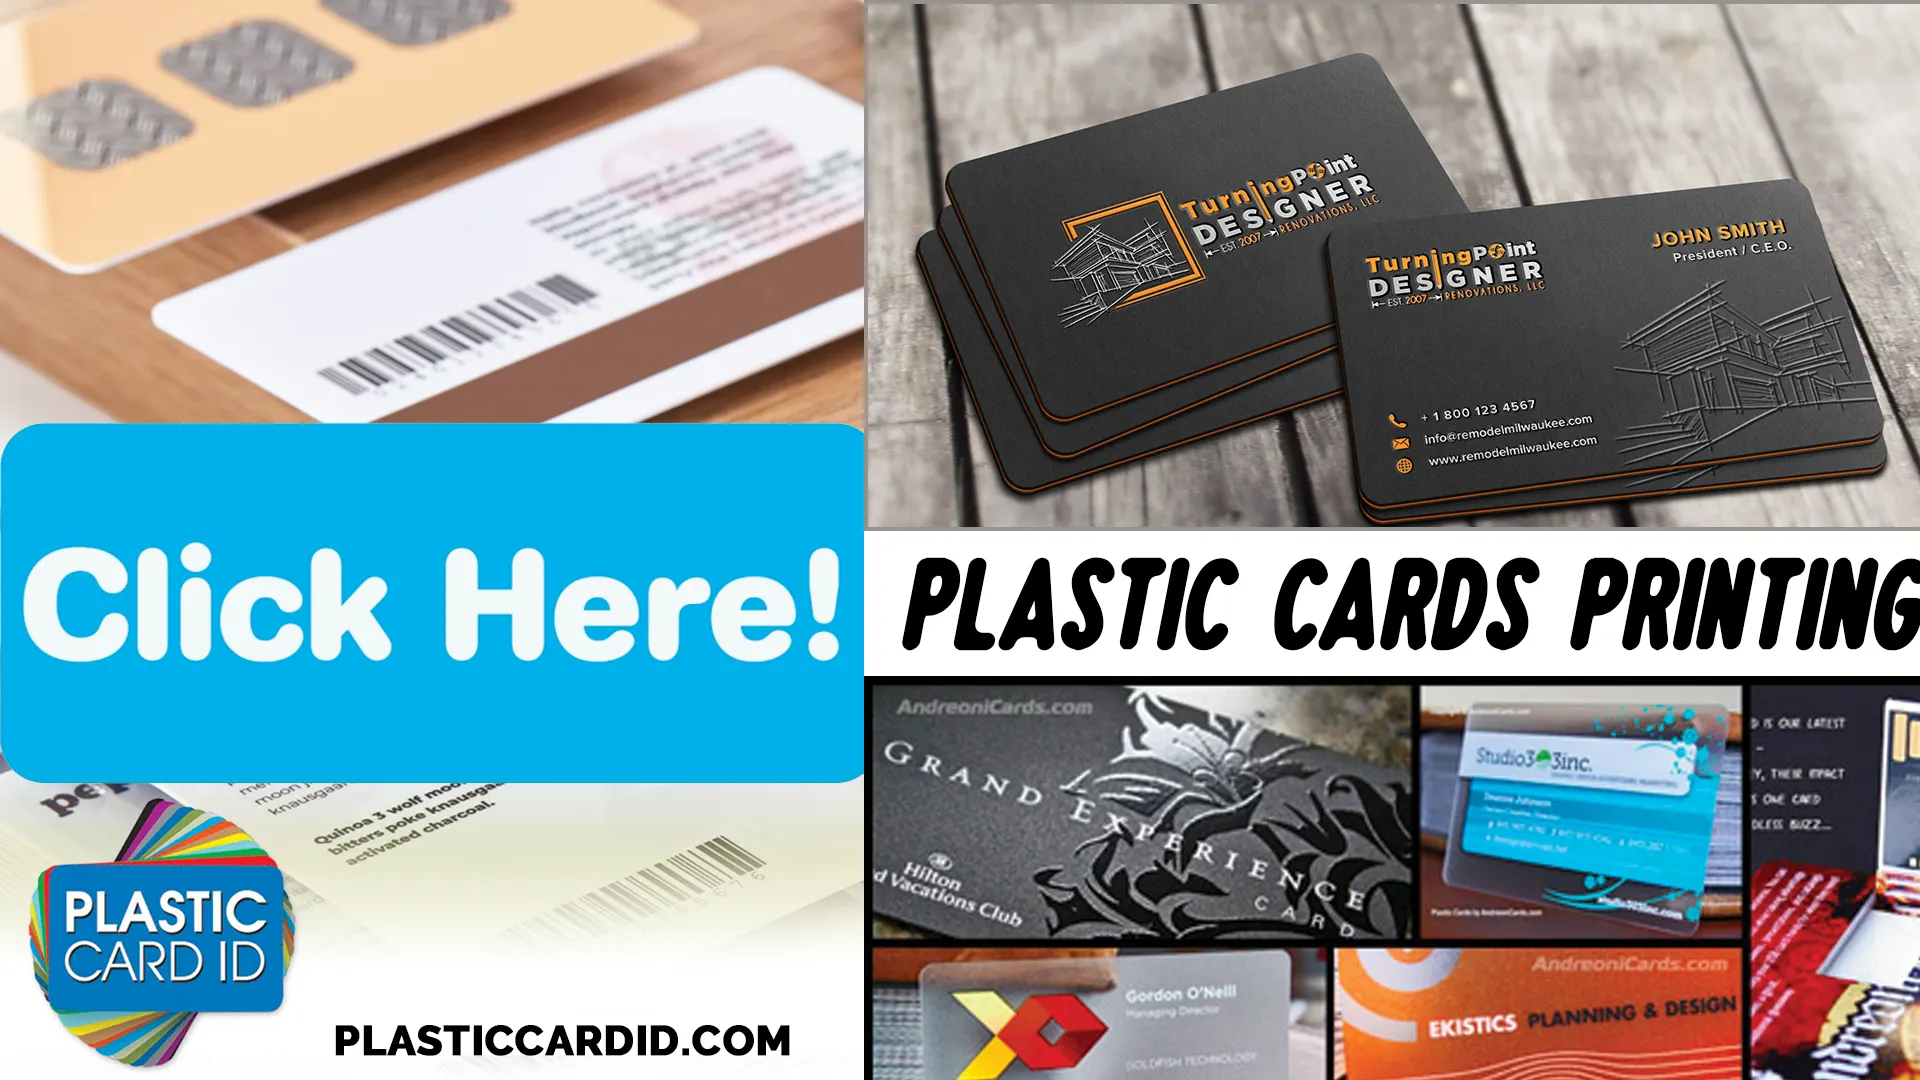 Welcome to the World of Secure, Tech-Integrated Plastic Cards